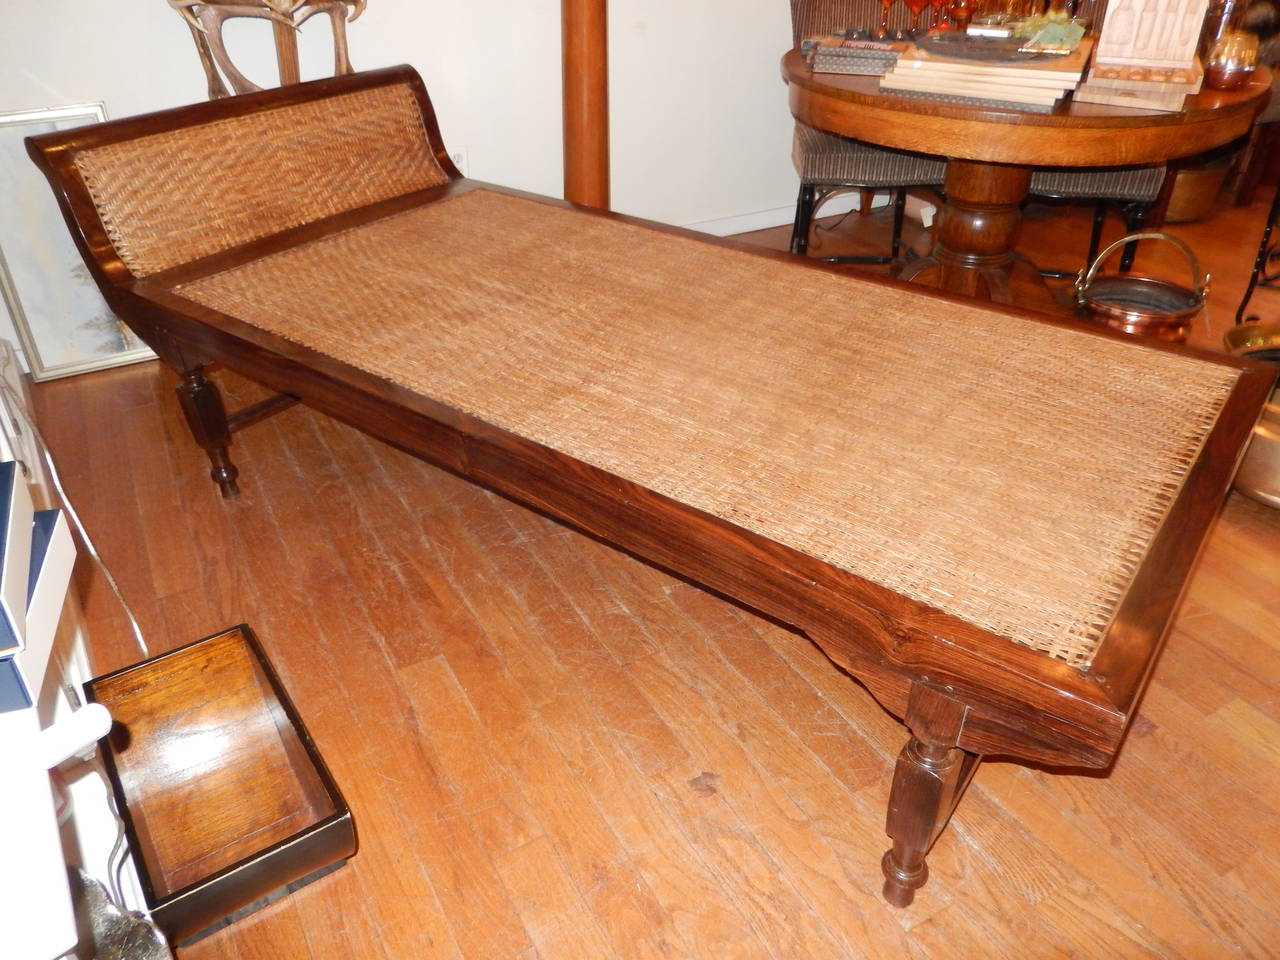 A rare West Indies oversized chaise. Solid rosewood frame and caned seat.
The caning is in excellent condition as is the rosewood. Both the cane work and frame are totally and beautifully handcrafted. A wonderful conversation piece for any room.